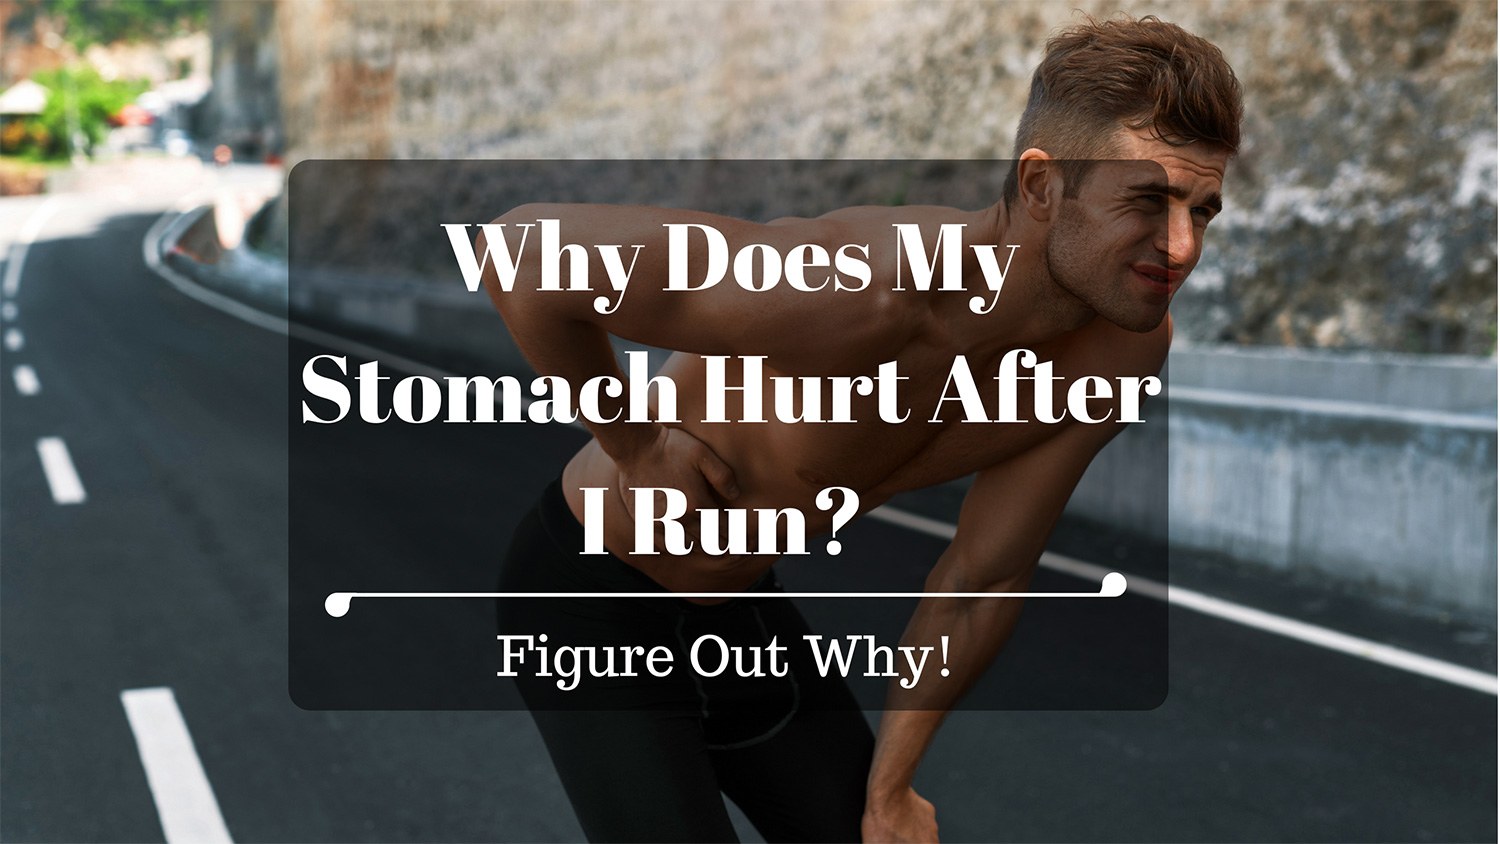 WHY DOES MY STOMACH HURT AFTER I RUN? FIGURE OUT WHY!